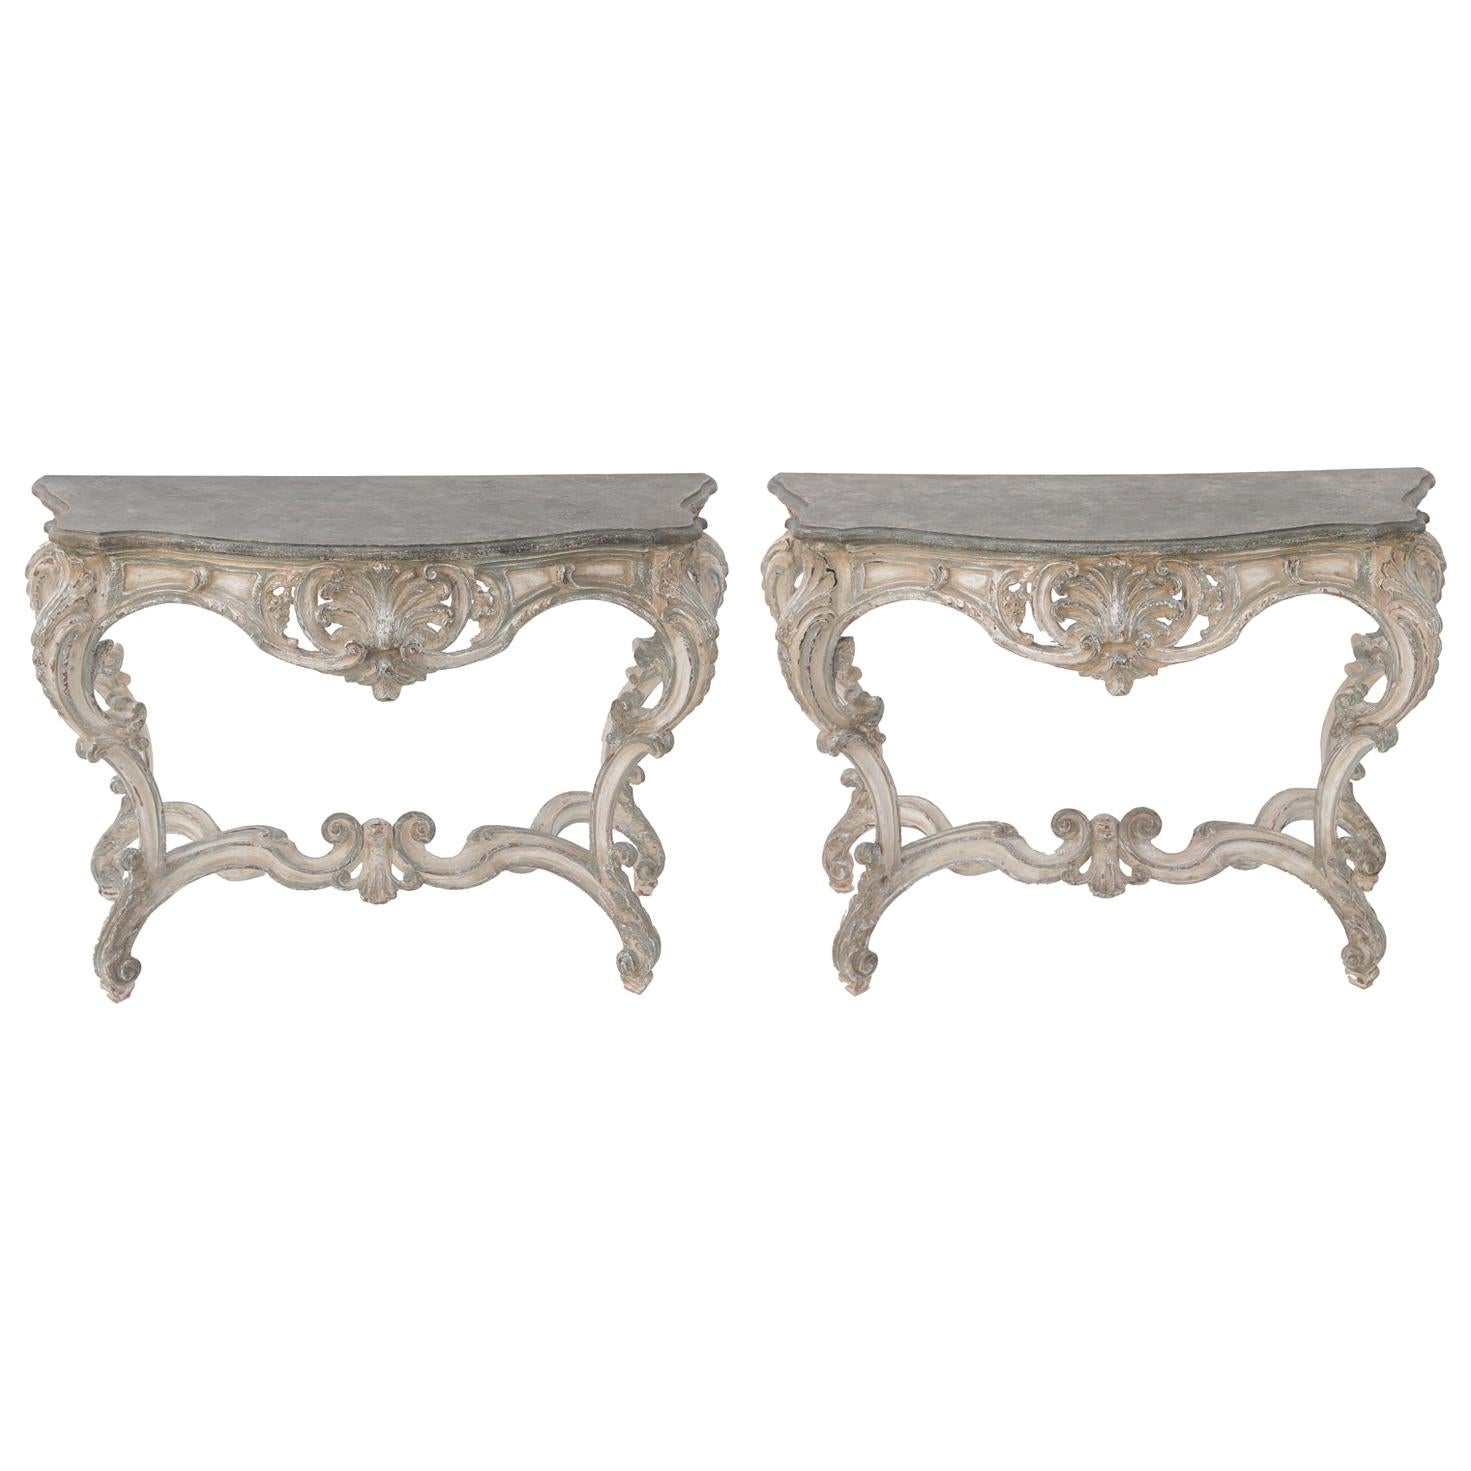 Pair of 18th/19th Century Painted Rococo Consoles